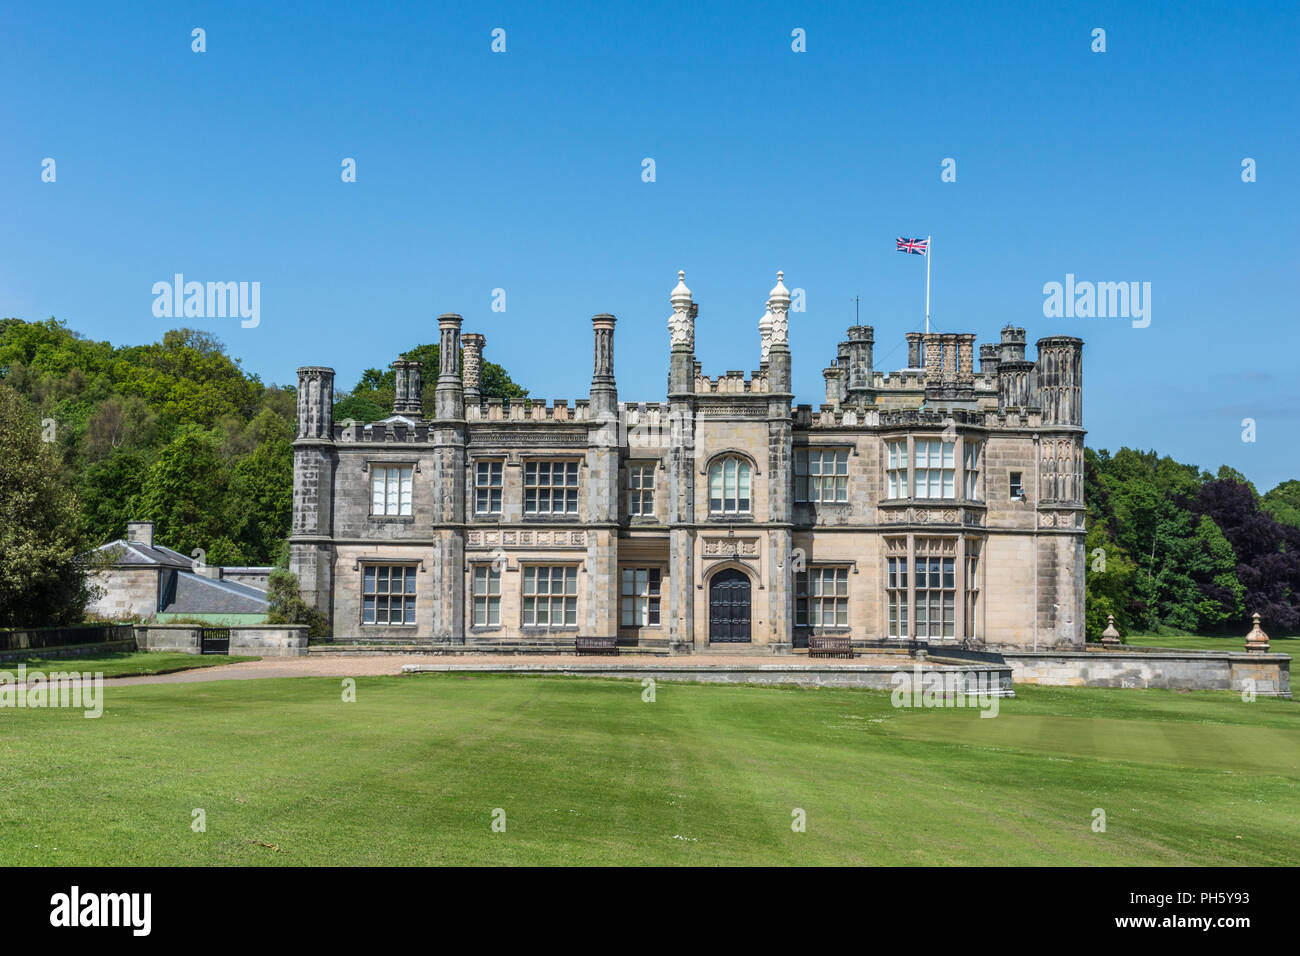 Edinburgh, Scotland, UK - June 14, 2012: Side facade of Dalmany house, mansion and castle in Tudor revival style on green lawn, with Brittish flag and Stock Photo